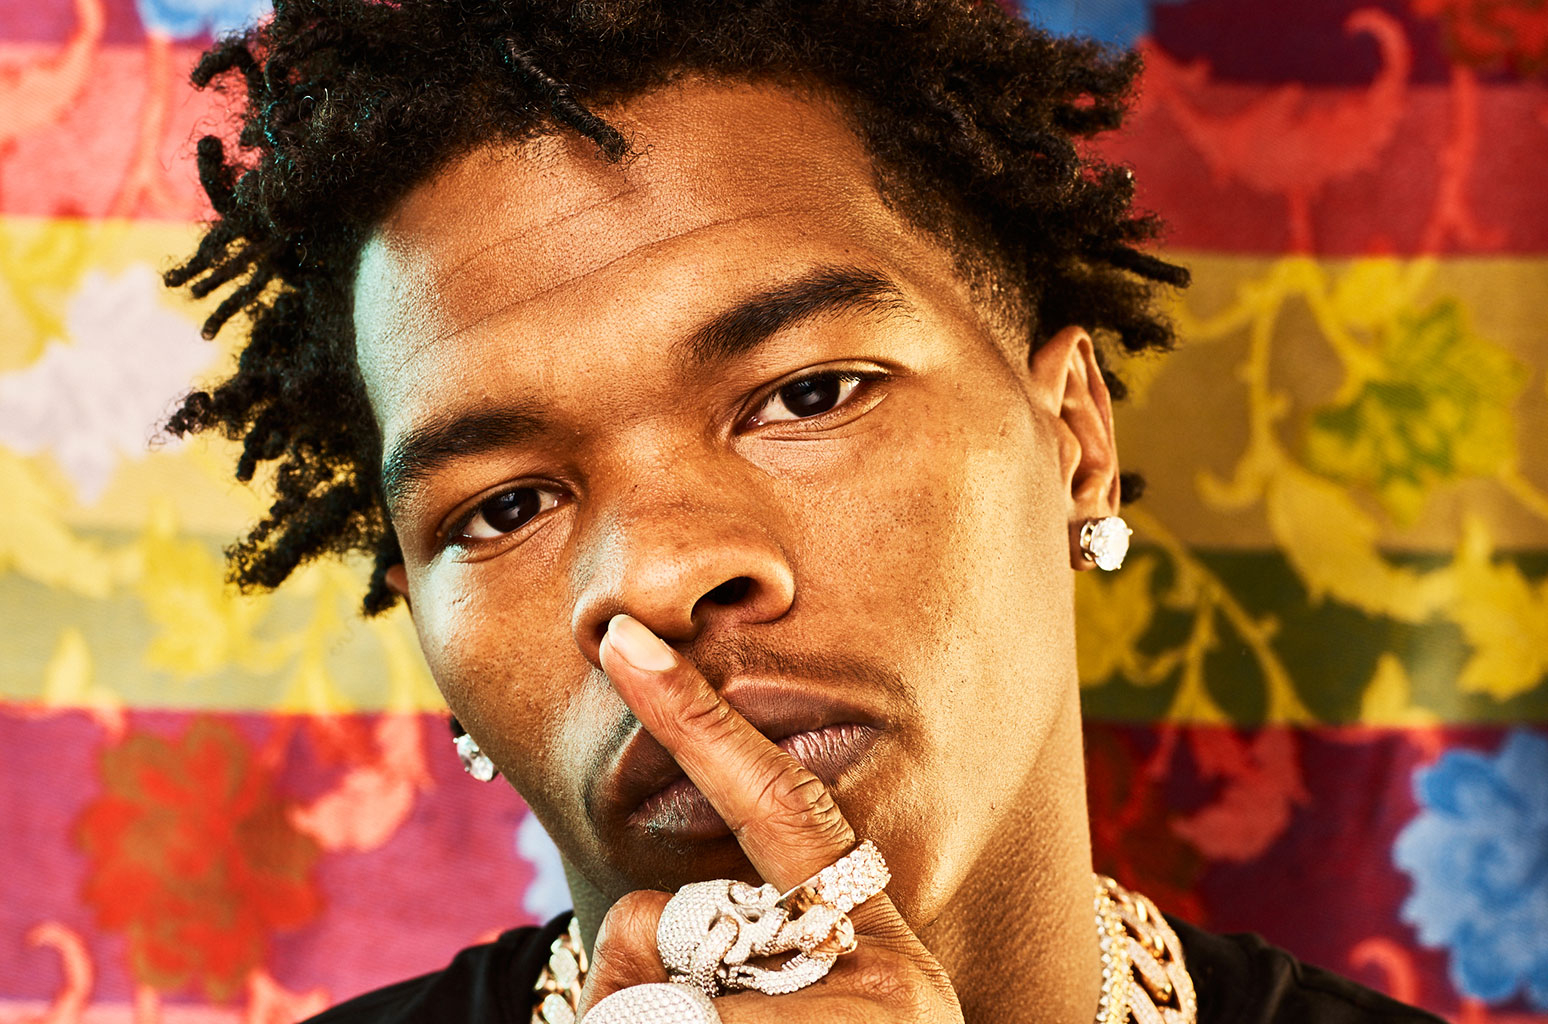 Lil Baby Reflects on His Life of Riches on 'Sum 2 Prove': Listen